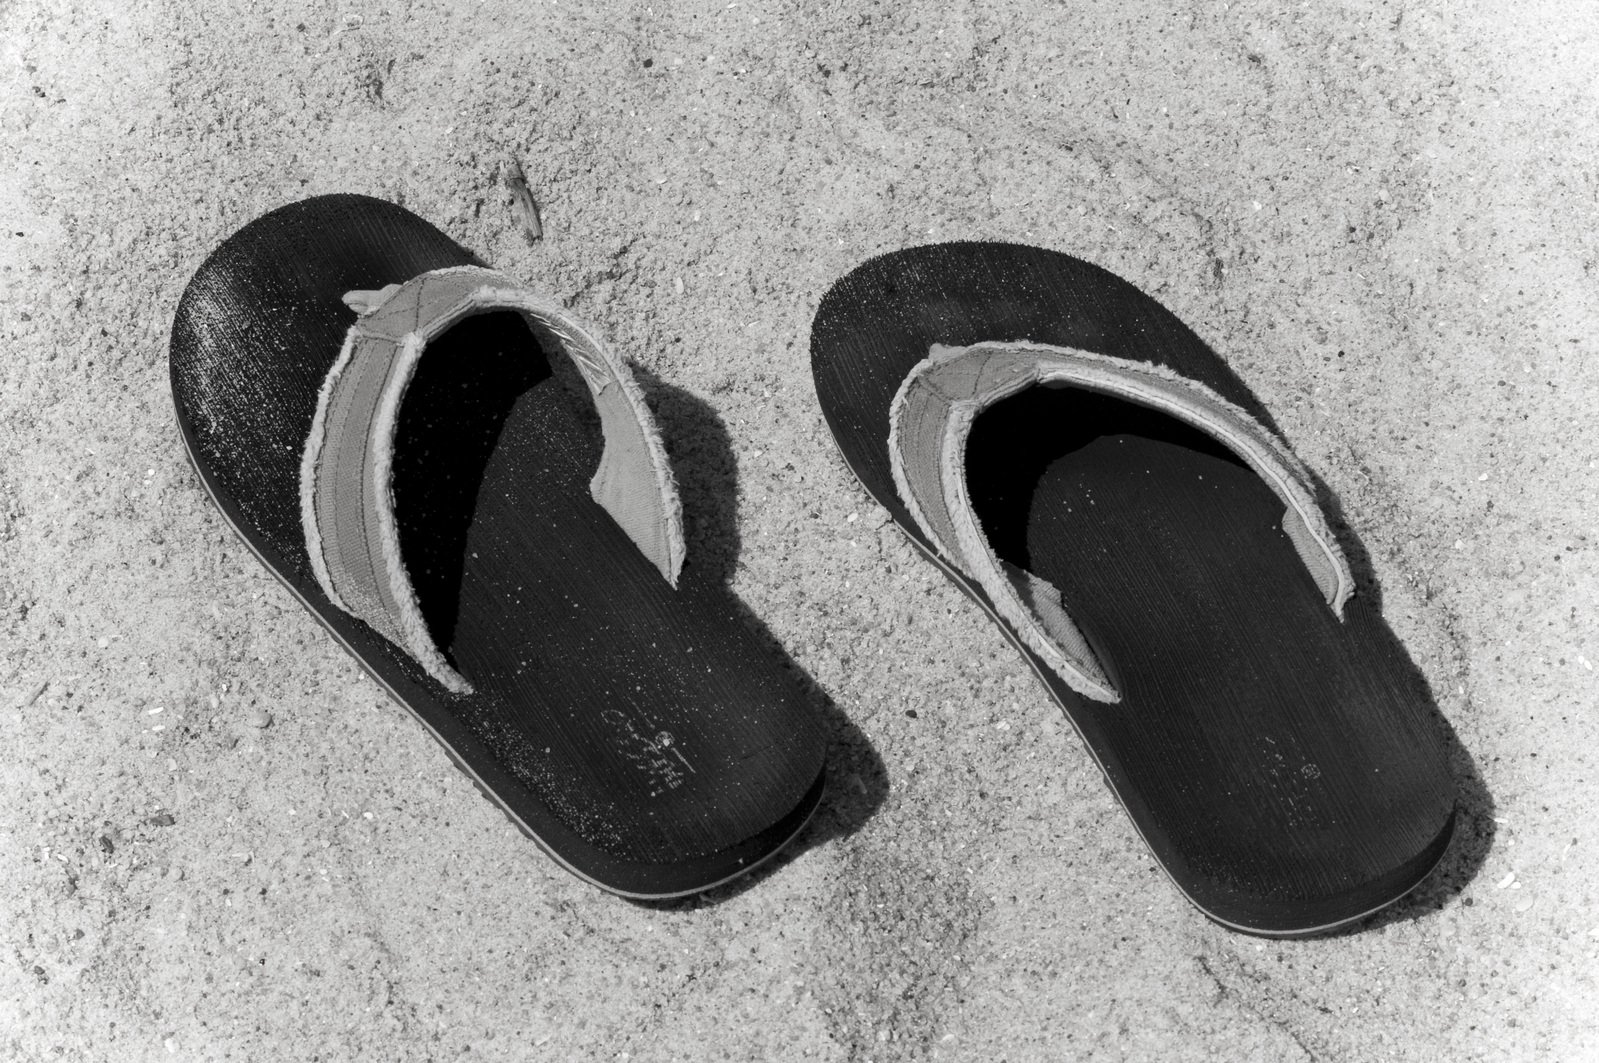 this pair of sandals is kept on a sandy beach